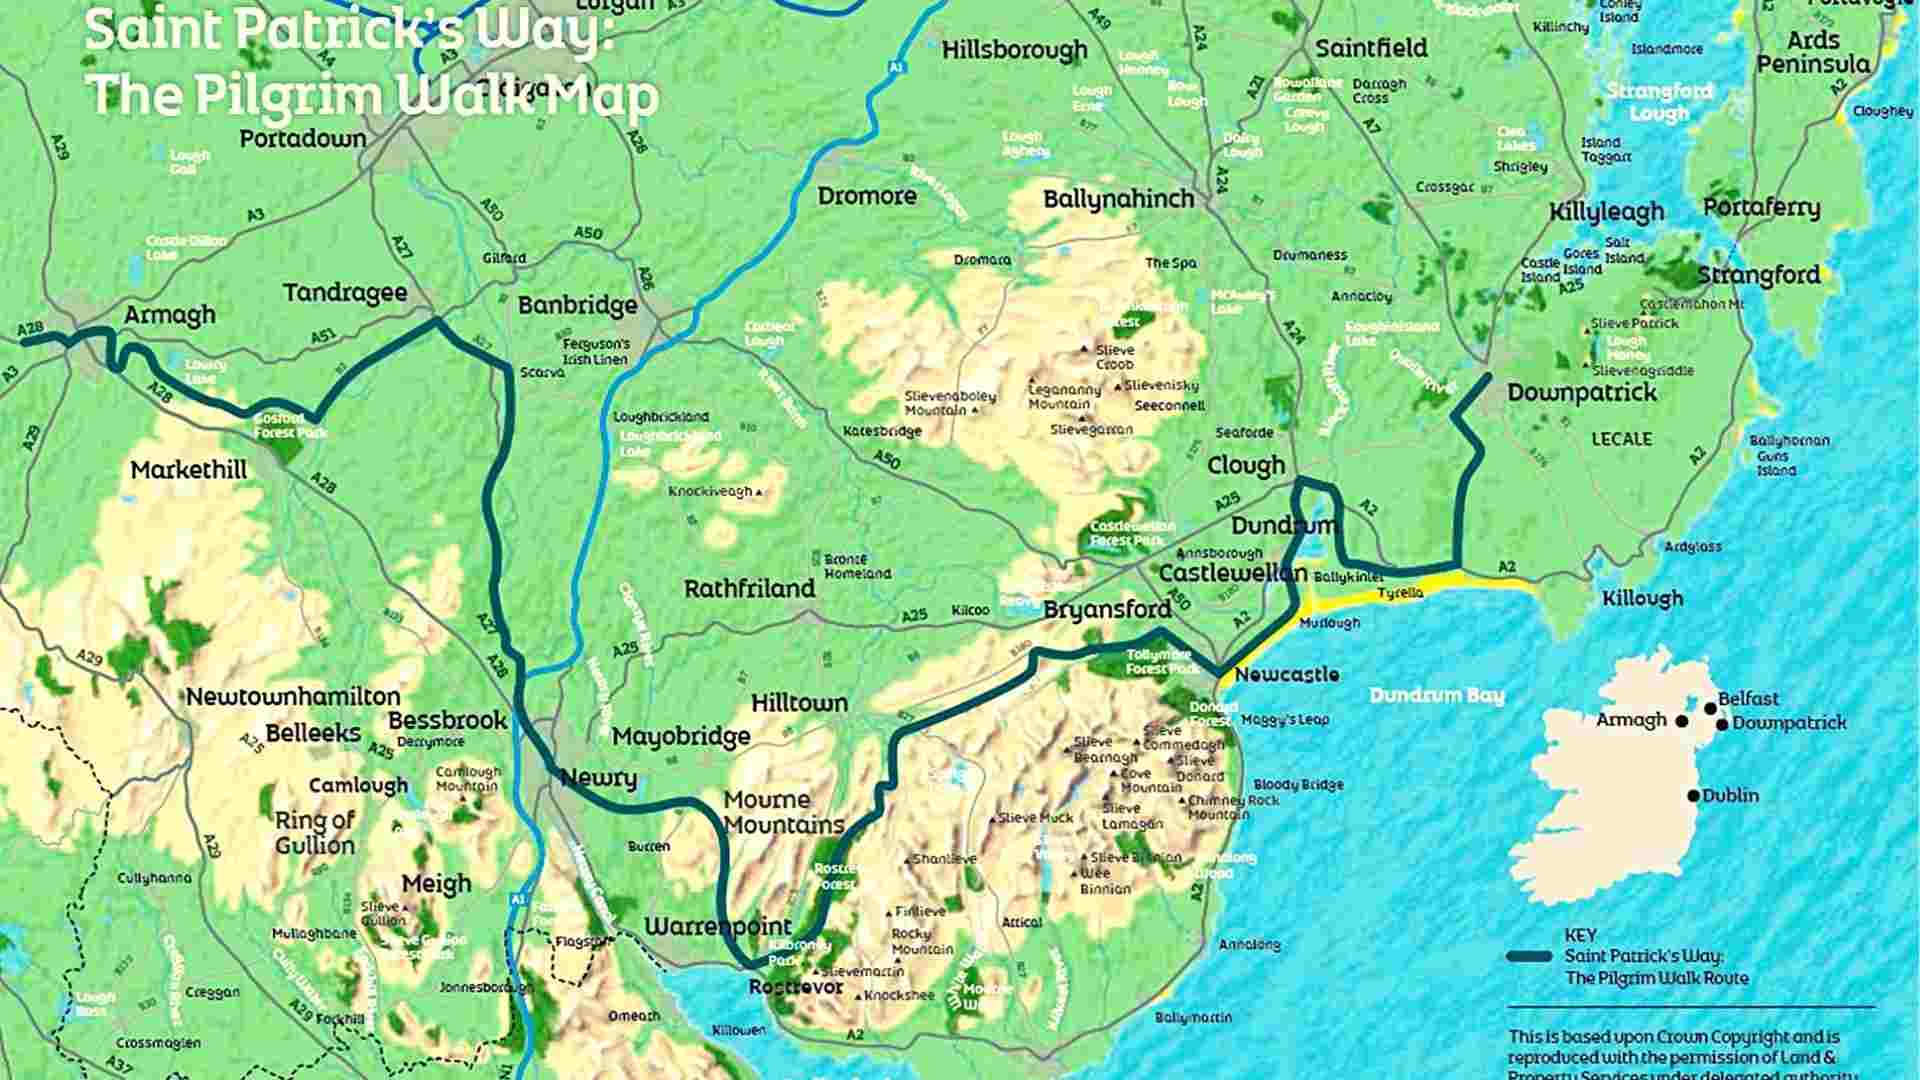 St. Patrick's Way Route Map Image